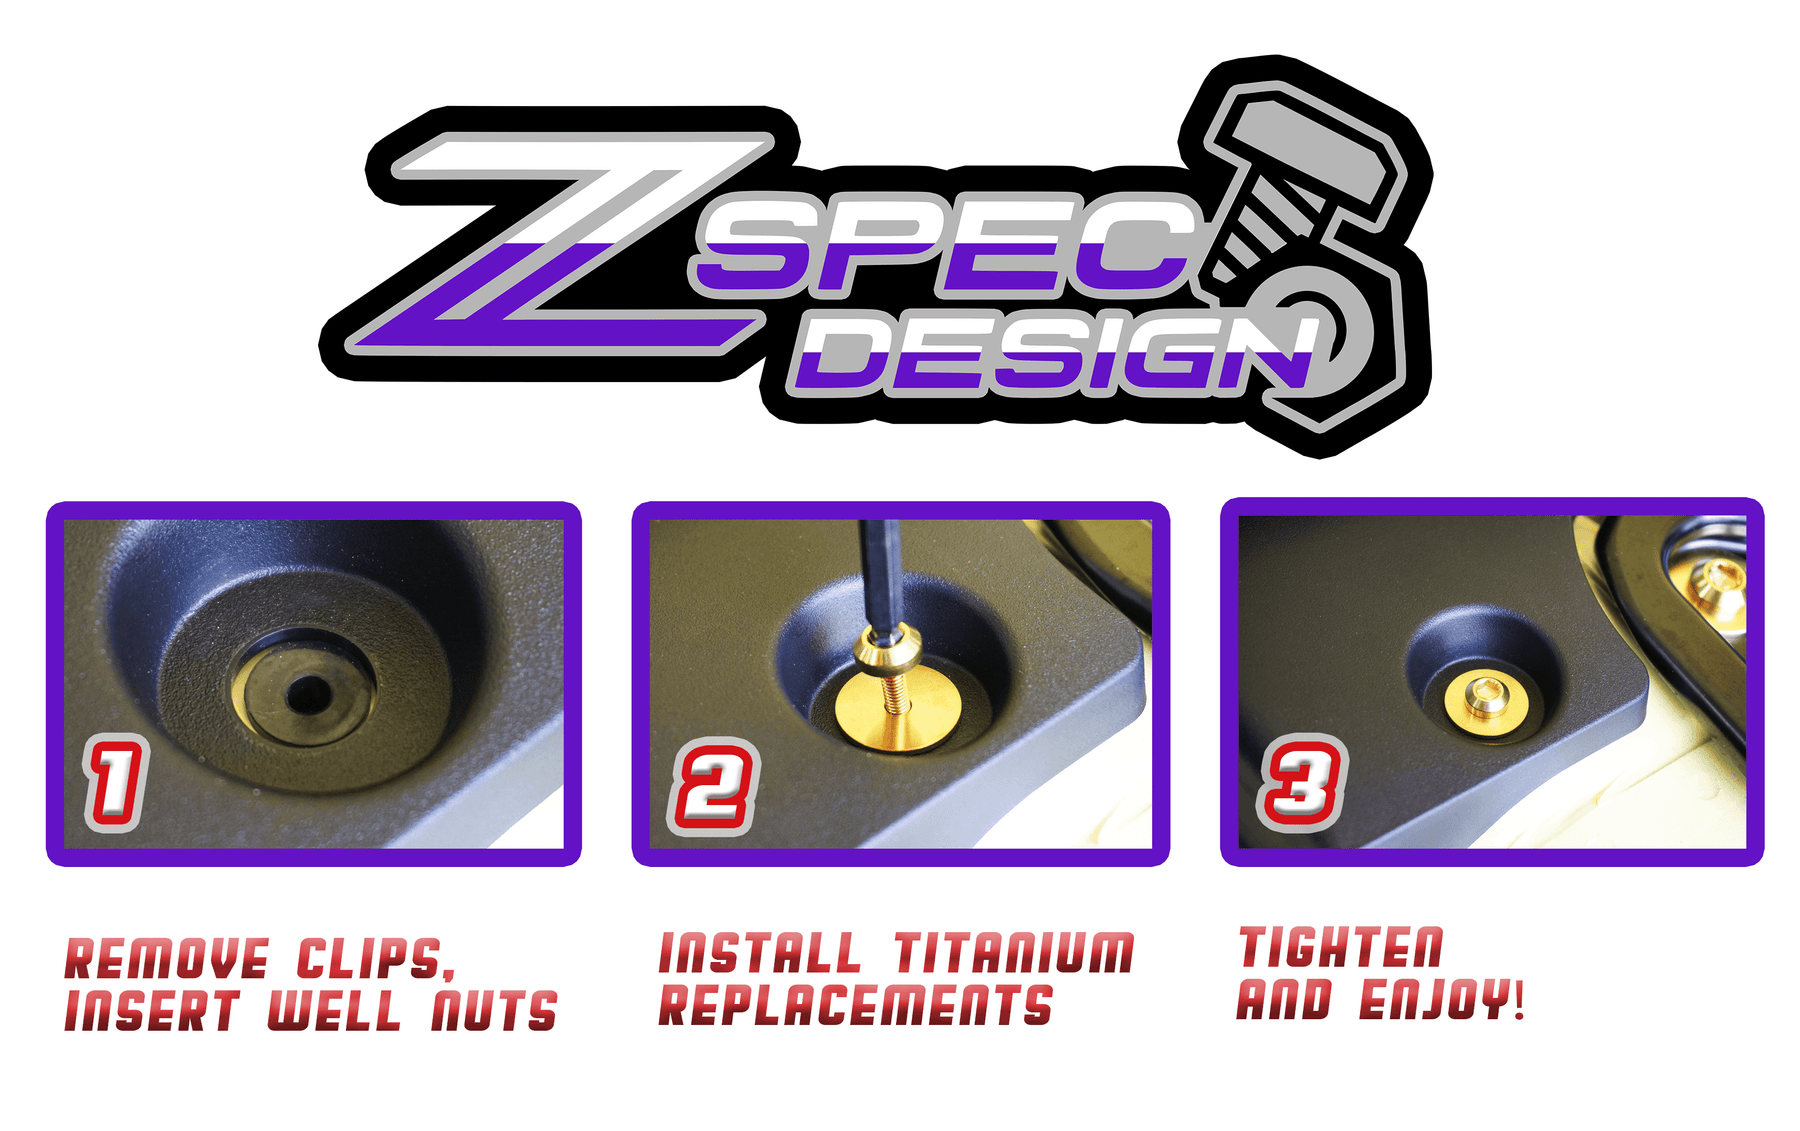 ZSPEC Clip-Replacement Fastener Solution for Nissan Z32 300zx Cowls, six-fastener kit, grade-5 titanium hardware with rubber well nuts. Black, Red, Blue, Burned, Silver, Gold and Purple colors.